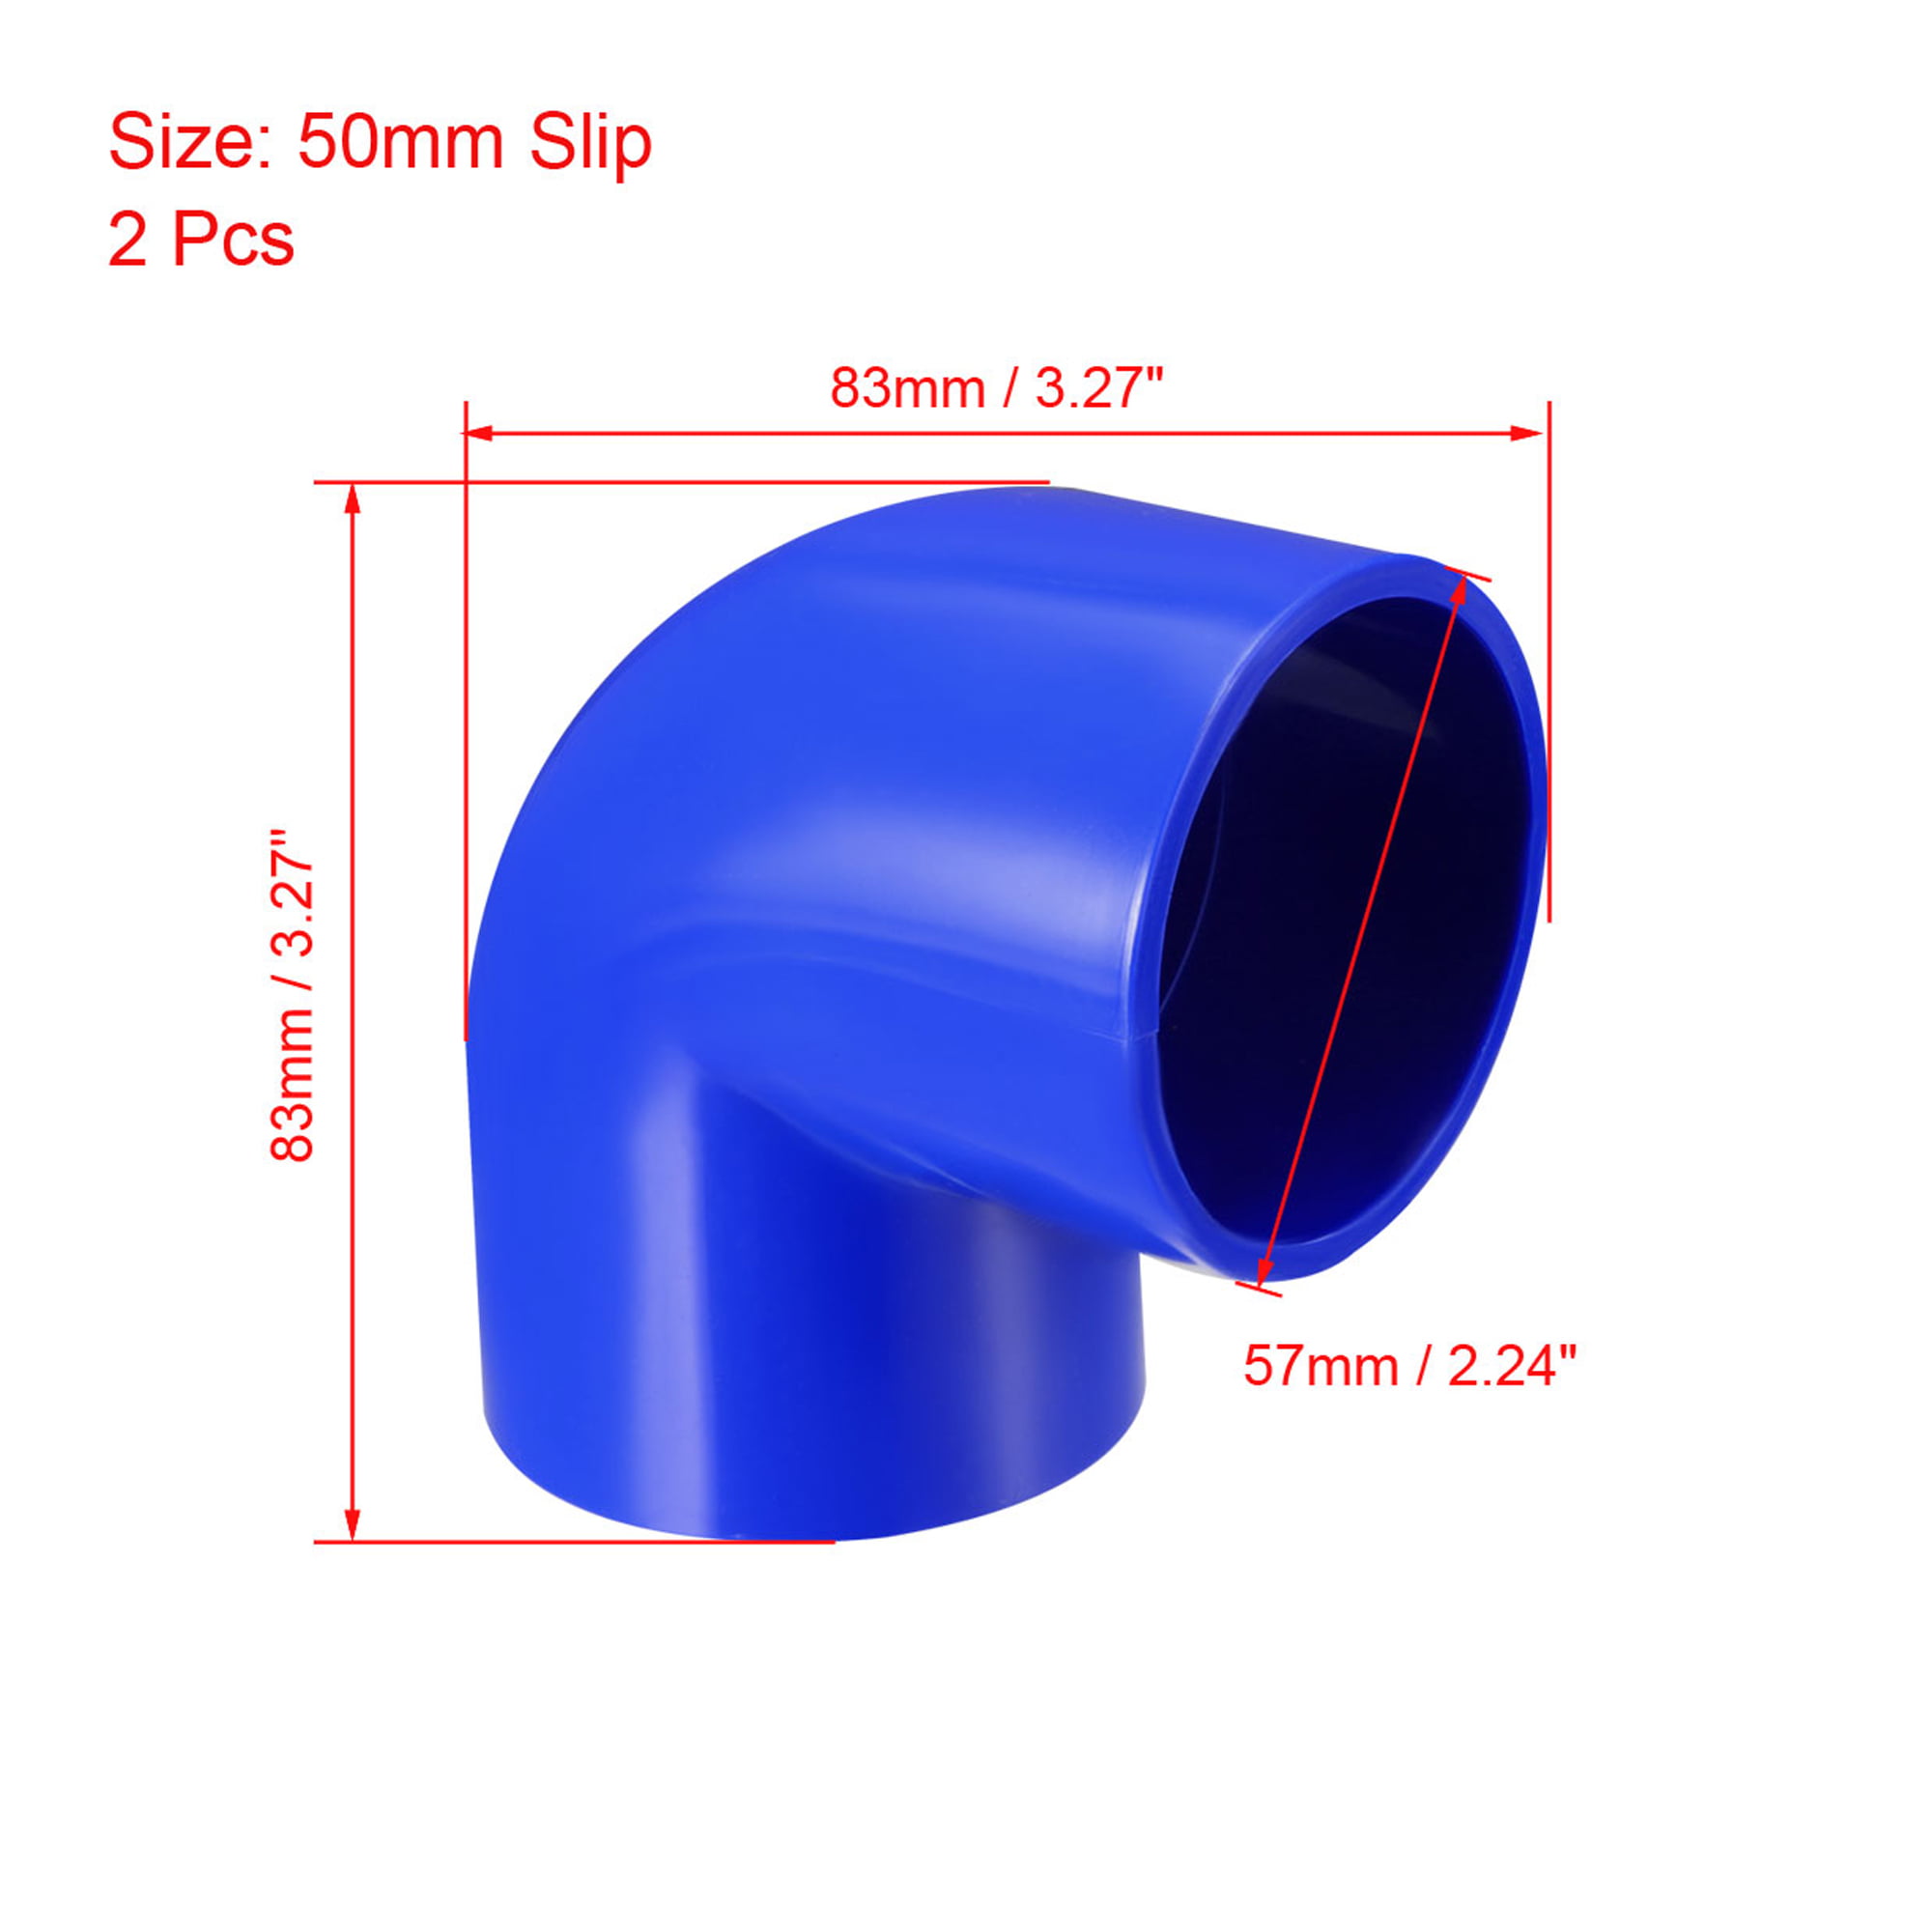 uxcell 50mm Slip 90 Degree PVC Pipe Fitting Elbow Coupling Adapter Blue 2 Pcs 